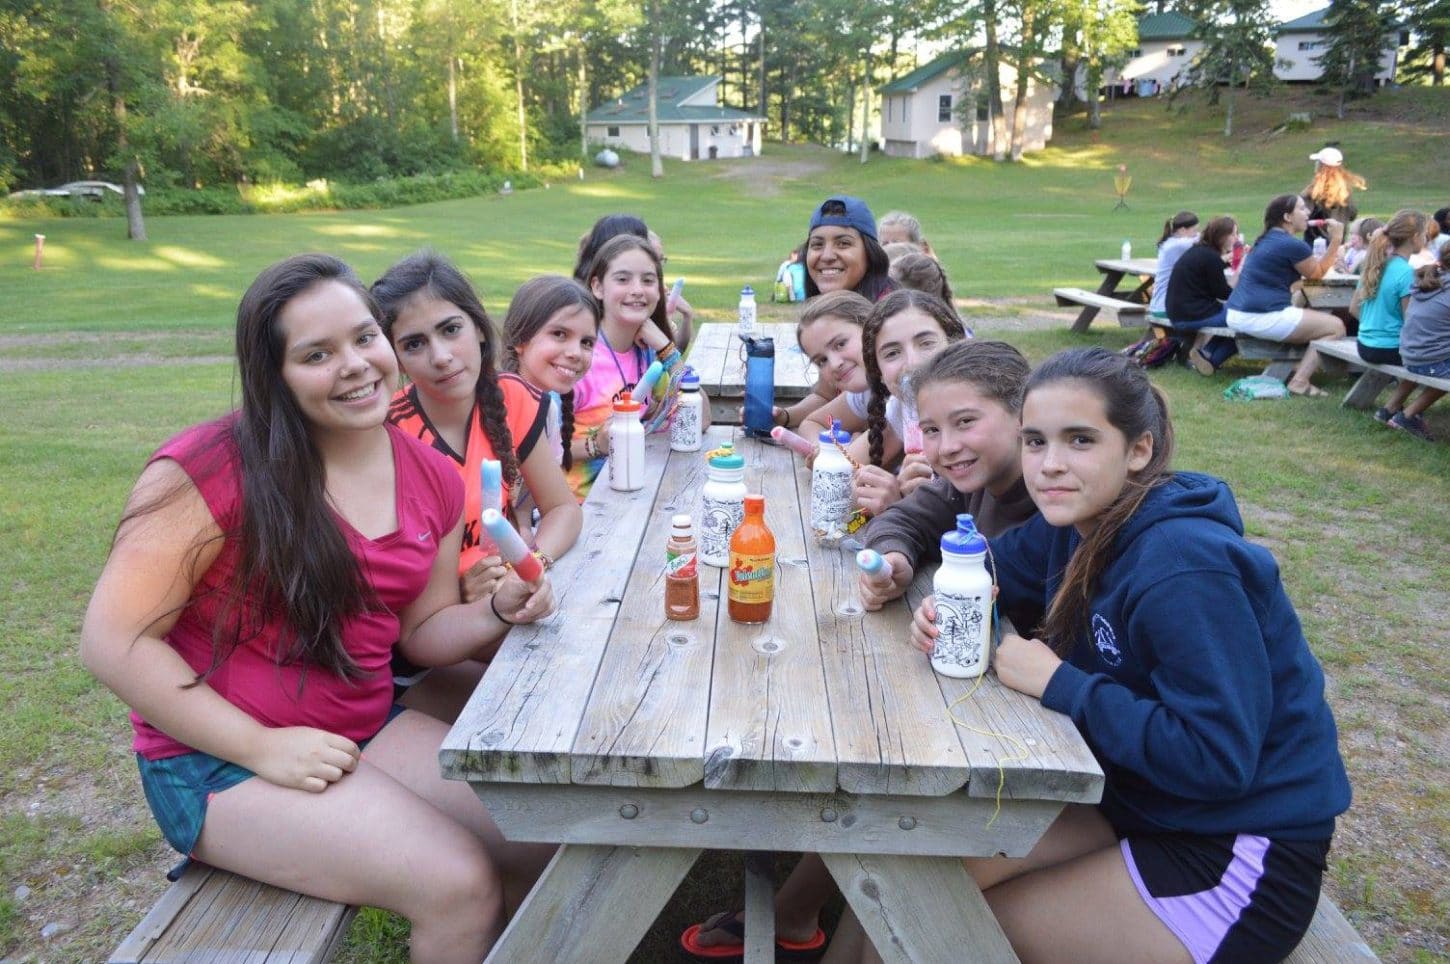 WeHaKee campers eating Popsicles and drinking refreshing beverages